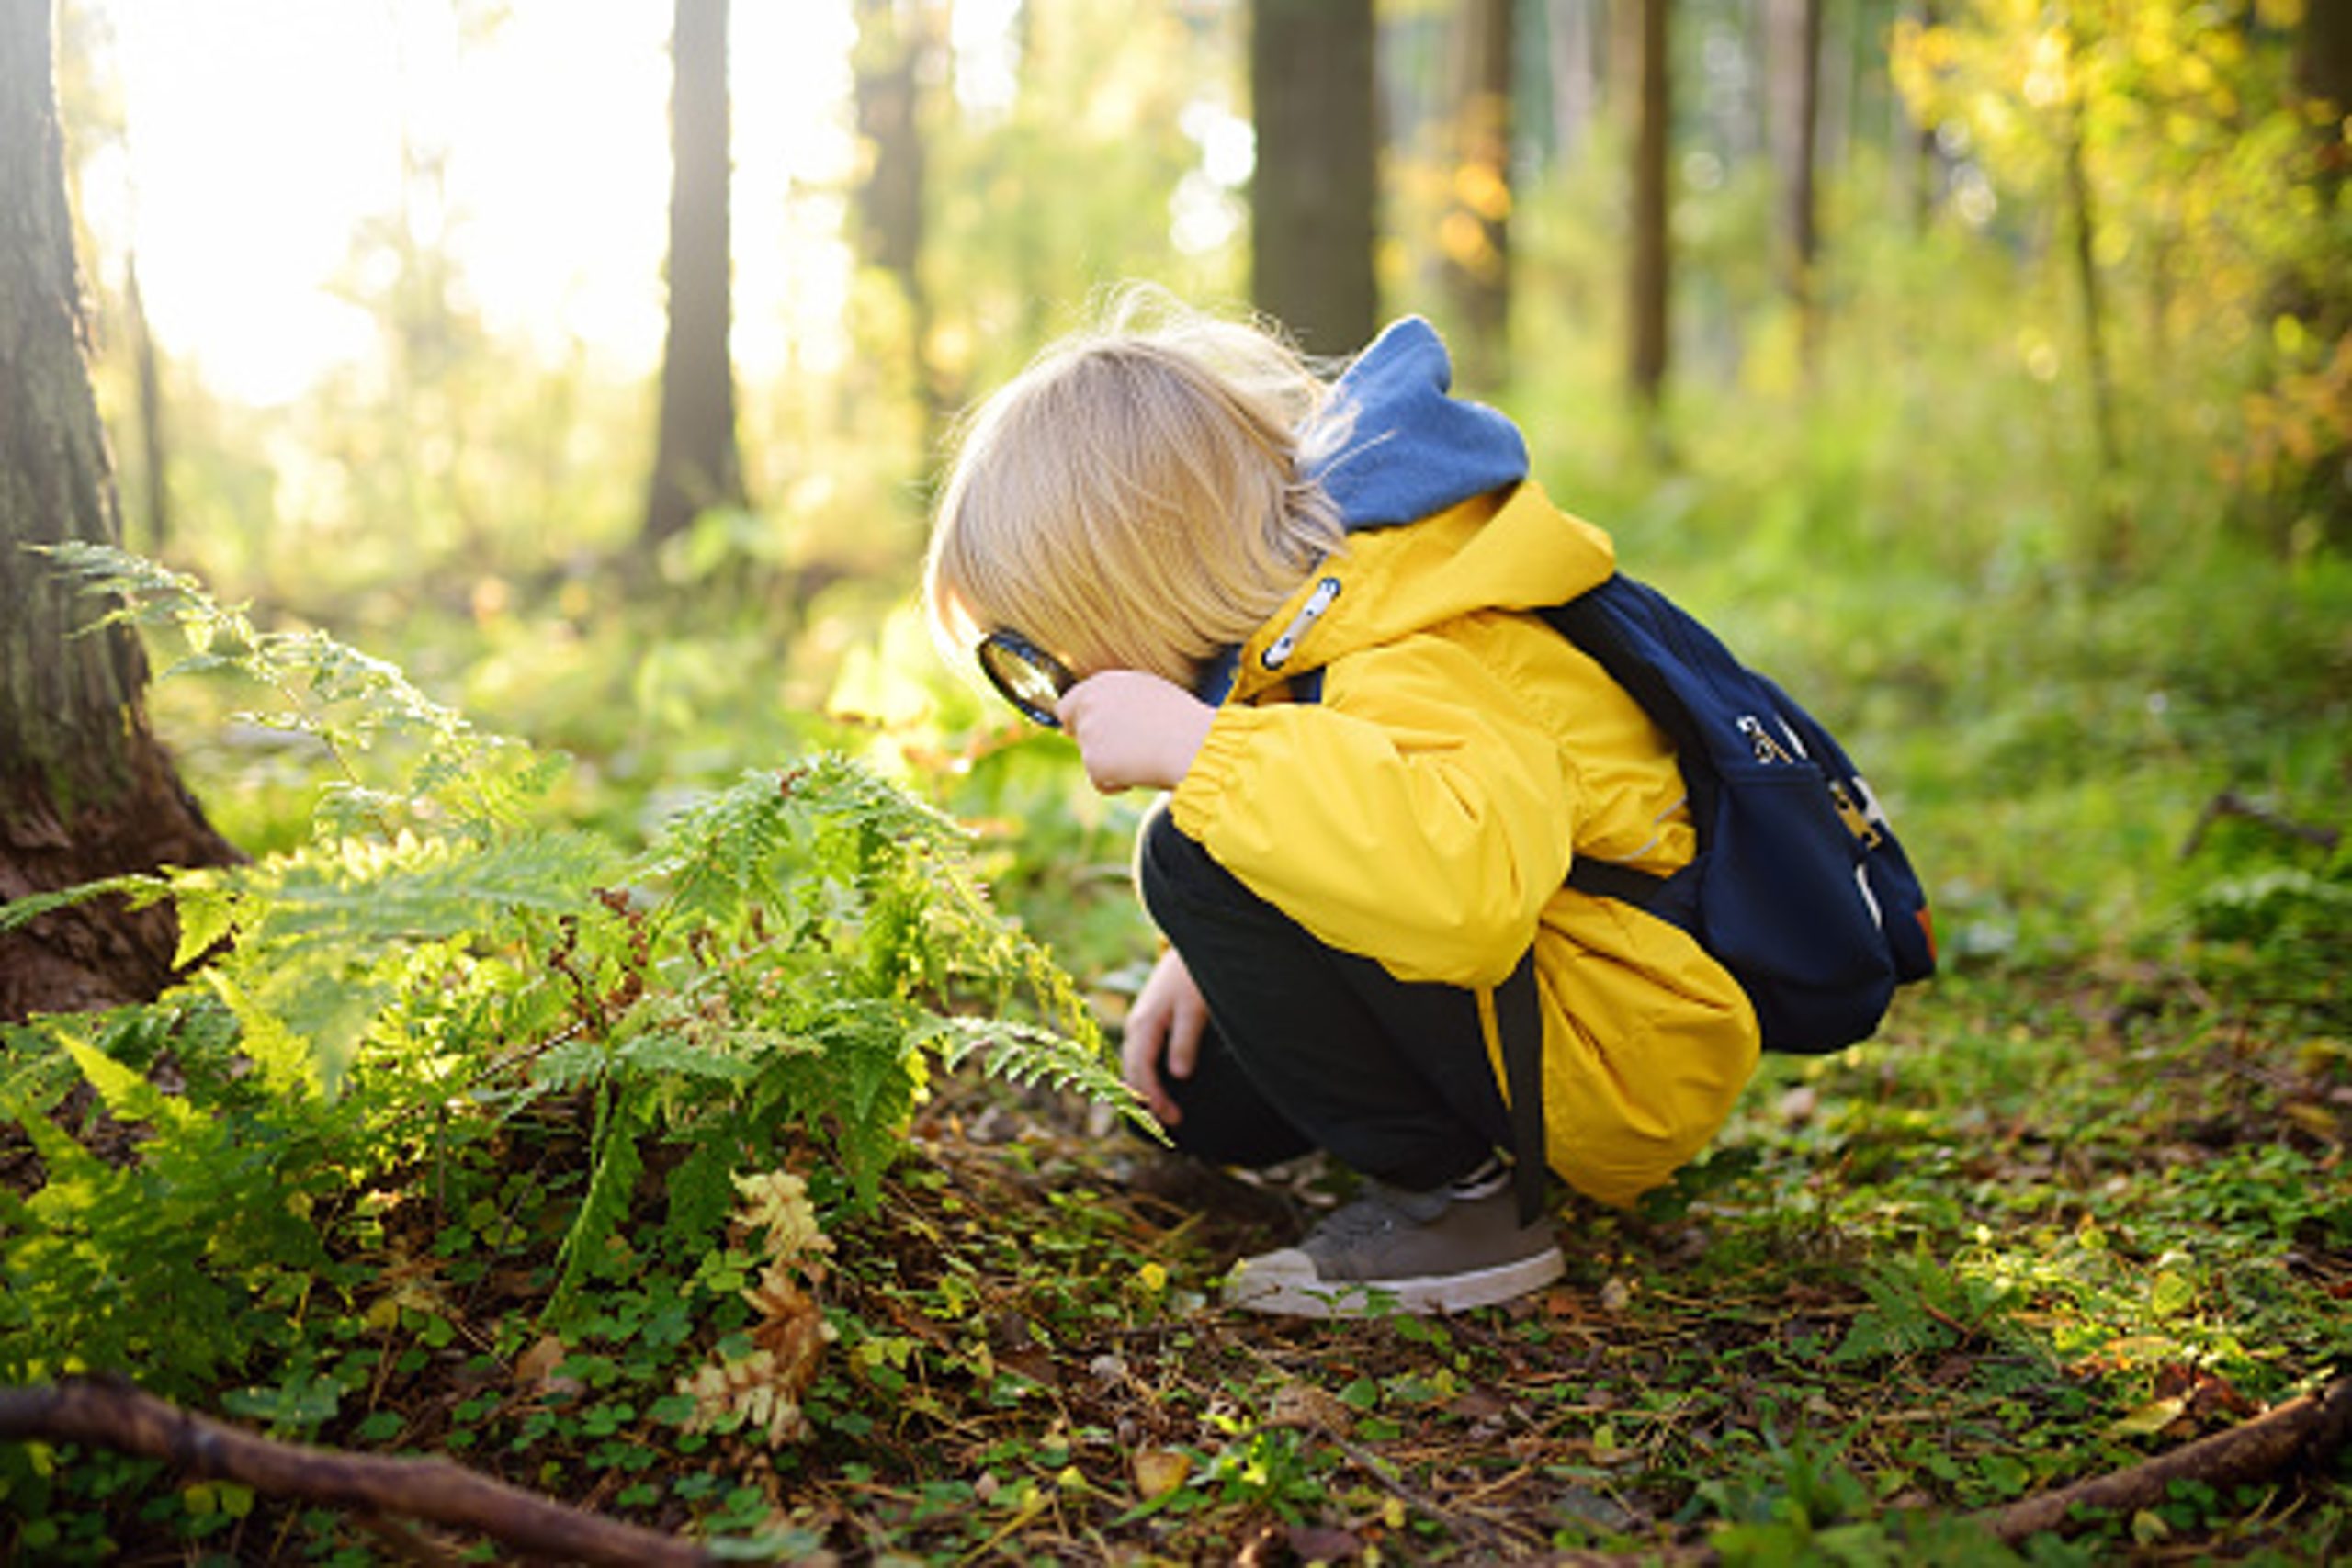 A blonde child wearing a yellow coat crouches on a forest floor, holding a magnifying glass up to a fern